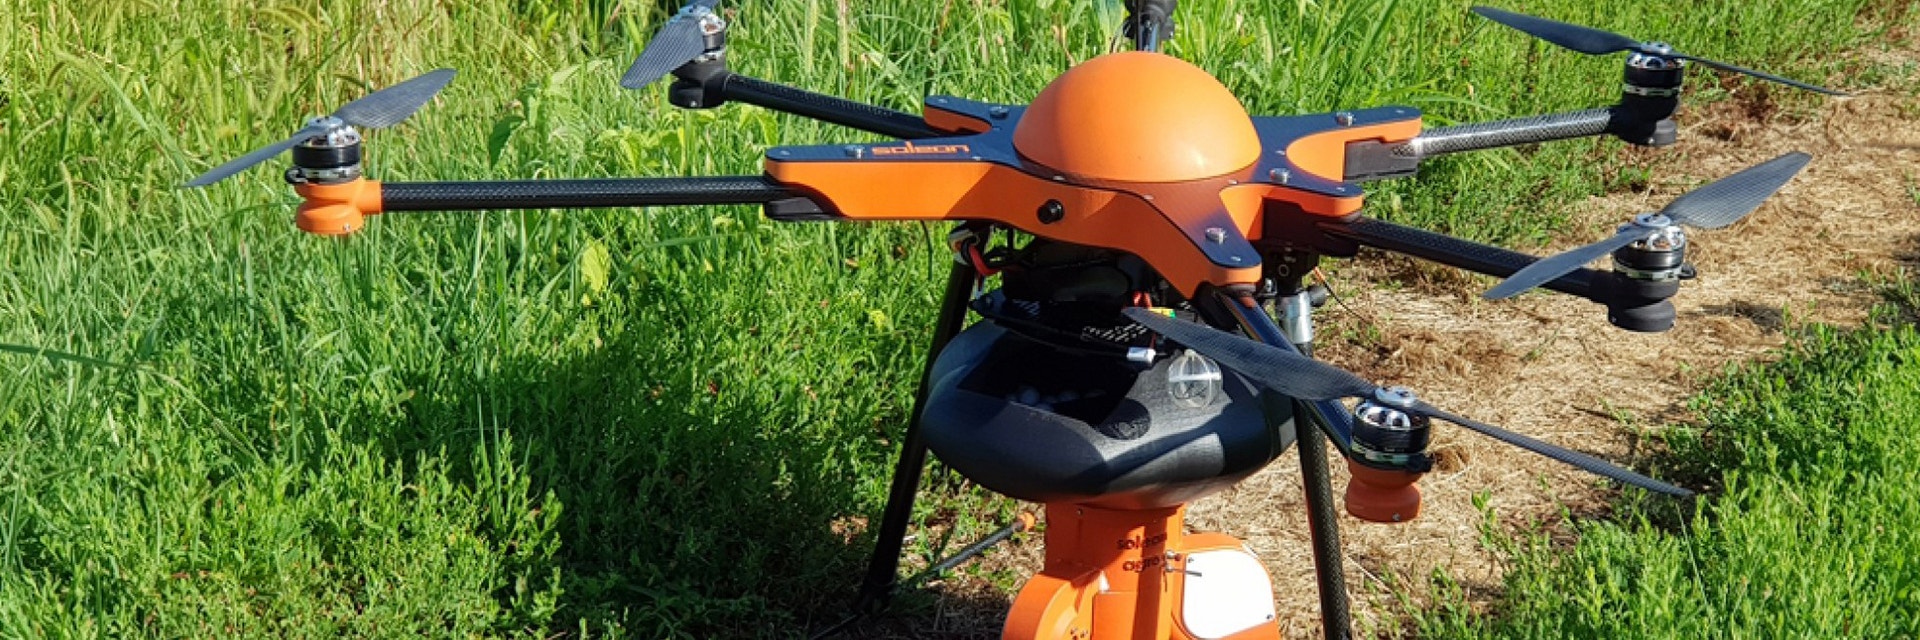 SoleonAgro drone with 3D-printed parts standing on the ground